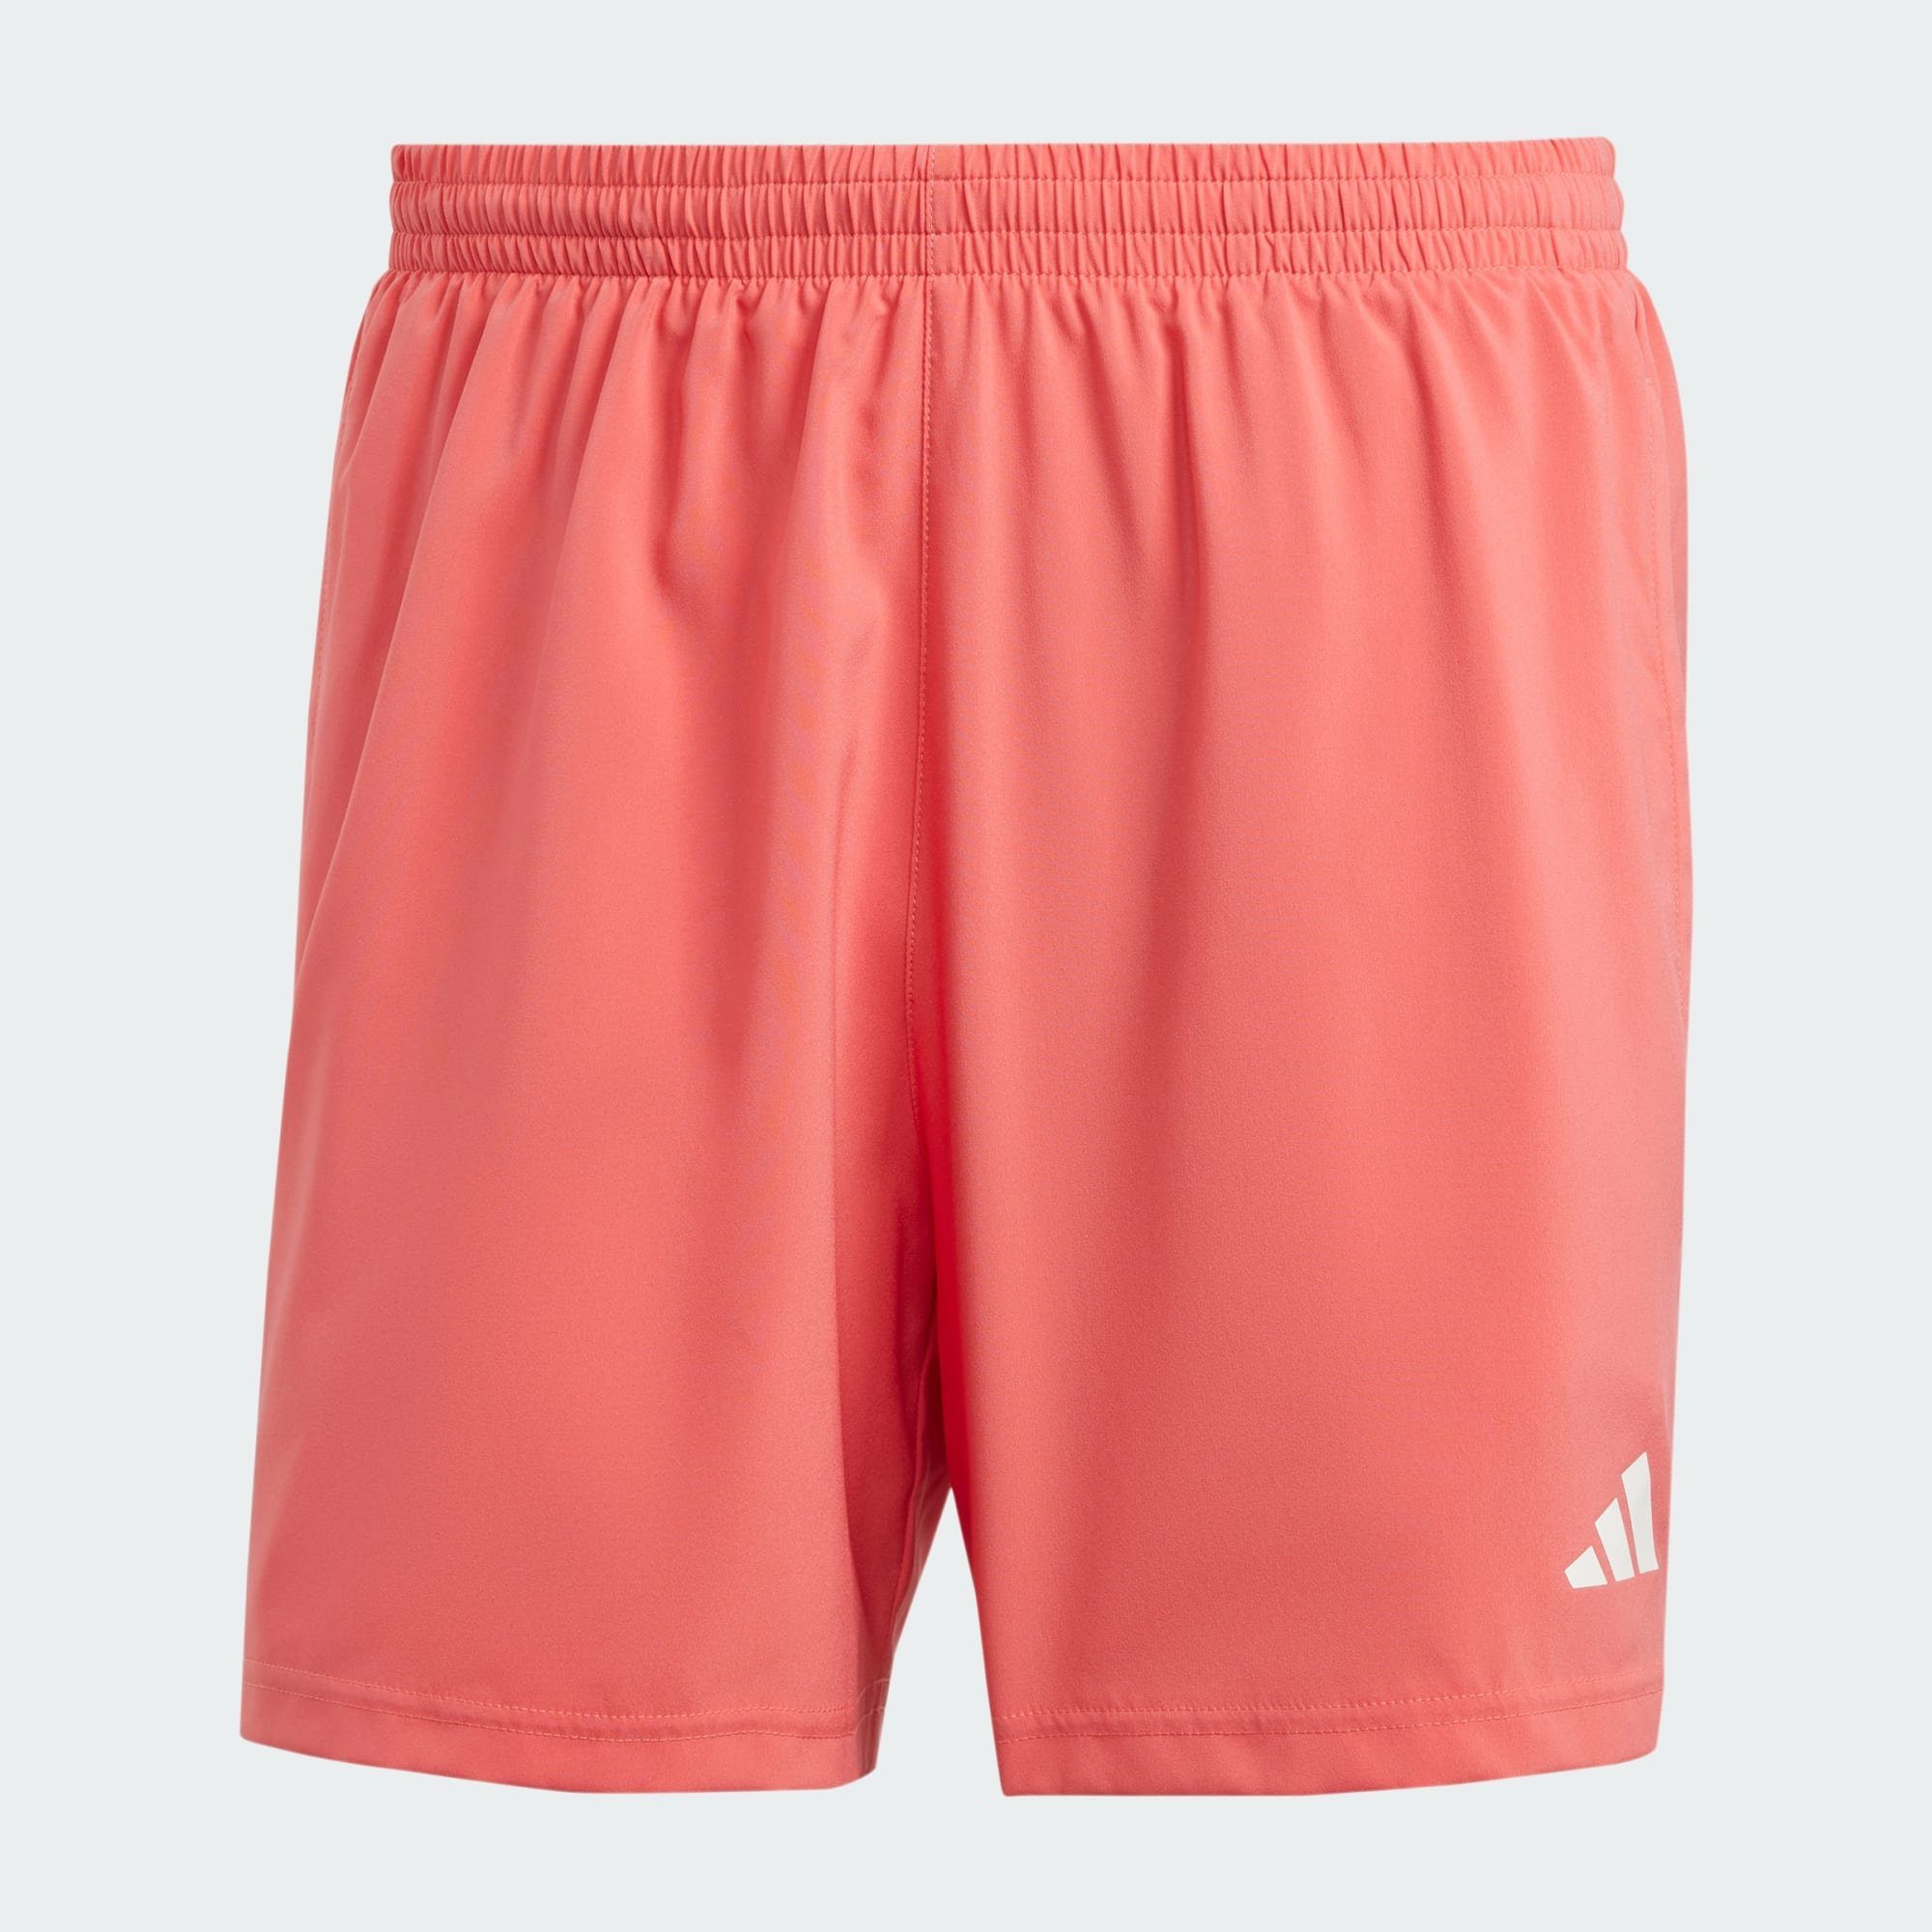 THE OWN SHORTS adidas RUN Performance Scarlet Laufshorts Preloved